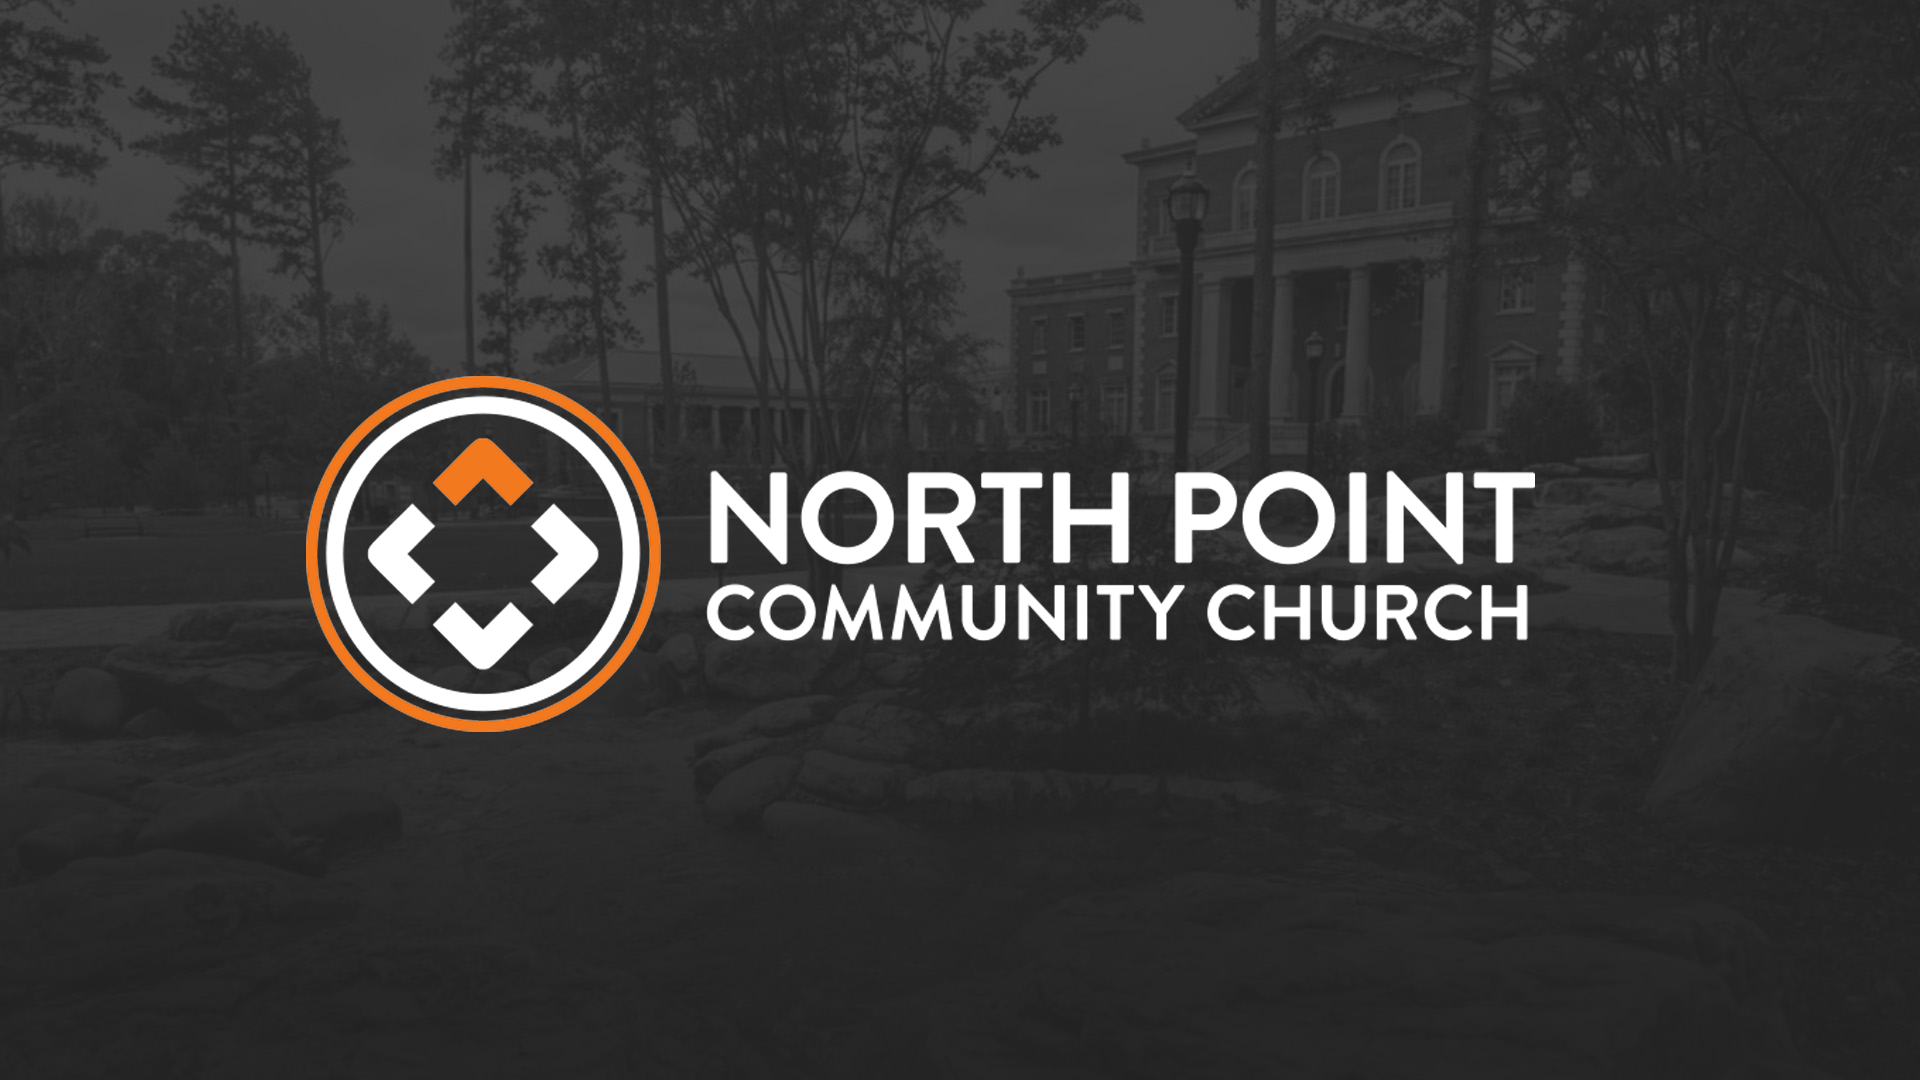 (c) Northpoint.org